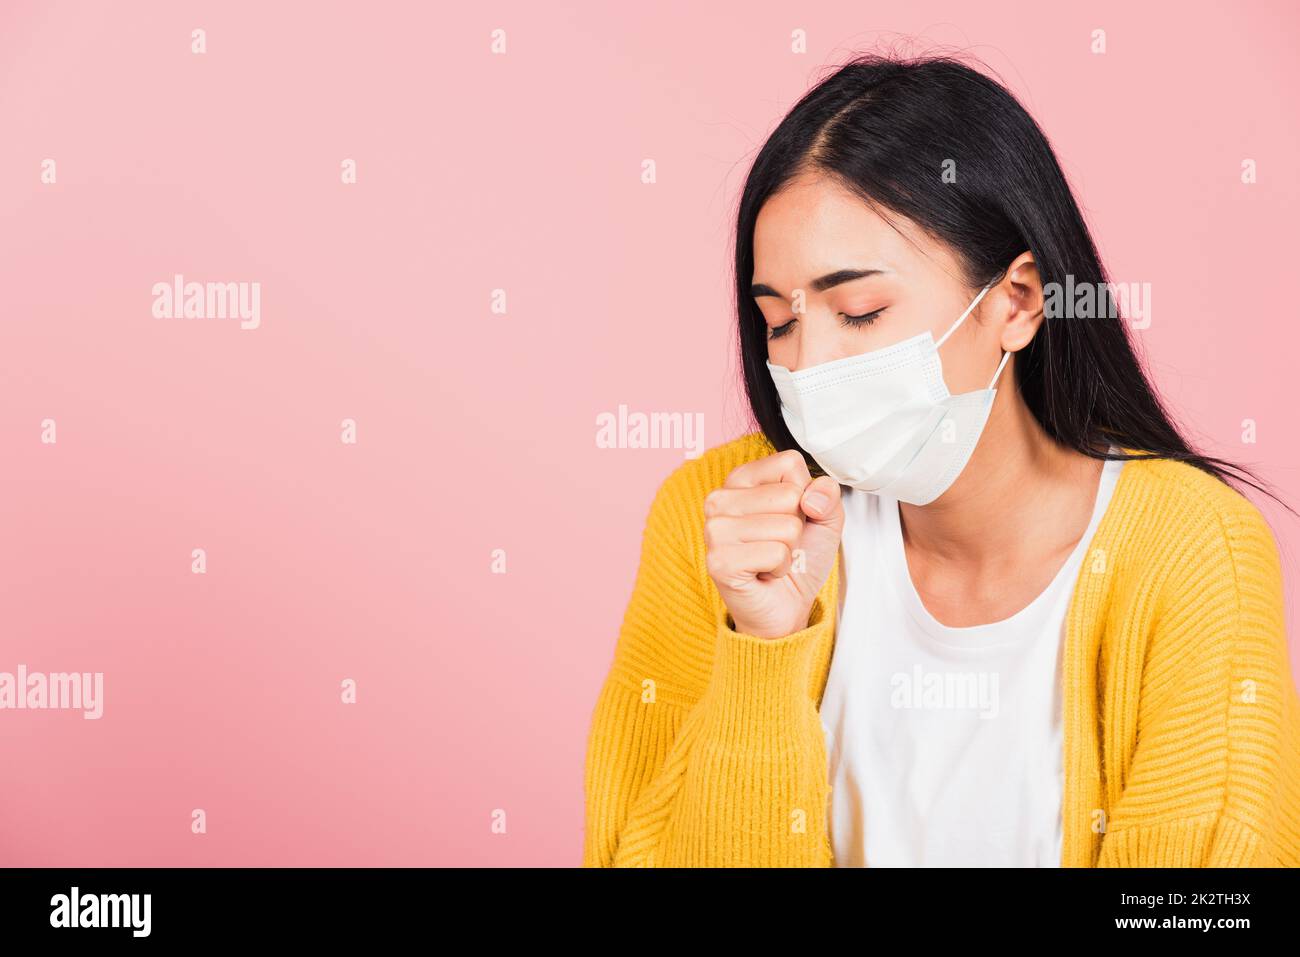 woman wearing medical mask protection for prevent infection coronavirus, COVID-19 she cough Stock Photo